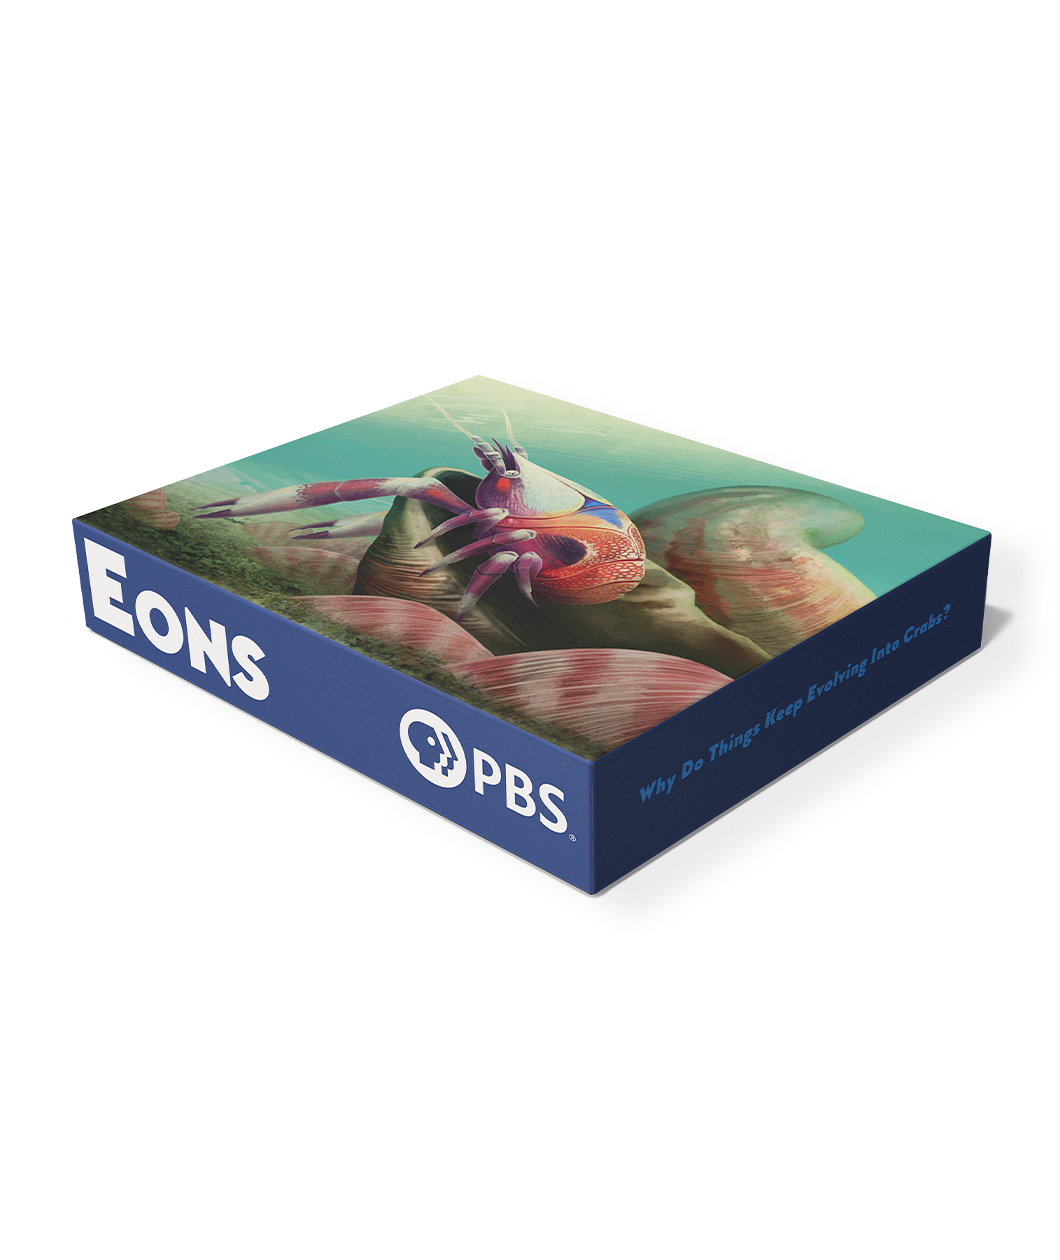 A puzzle box with a picture of a crab on the ocean floor. The box says "Eons" and "PBS". 